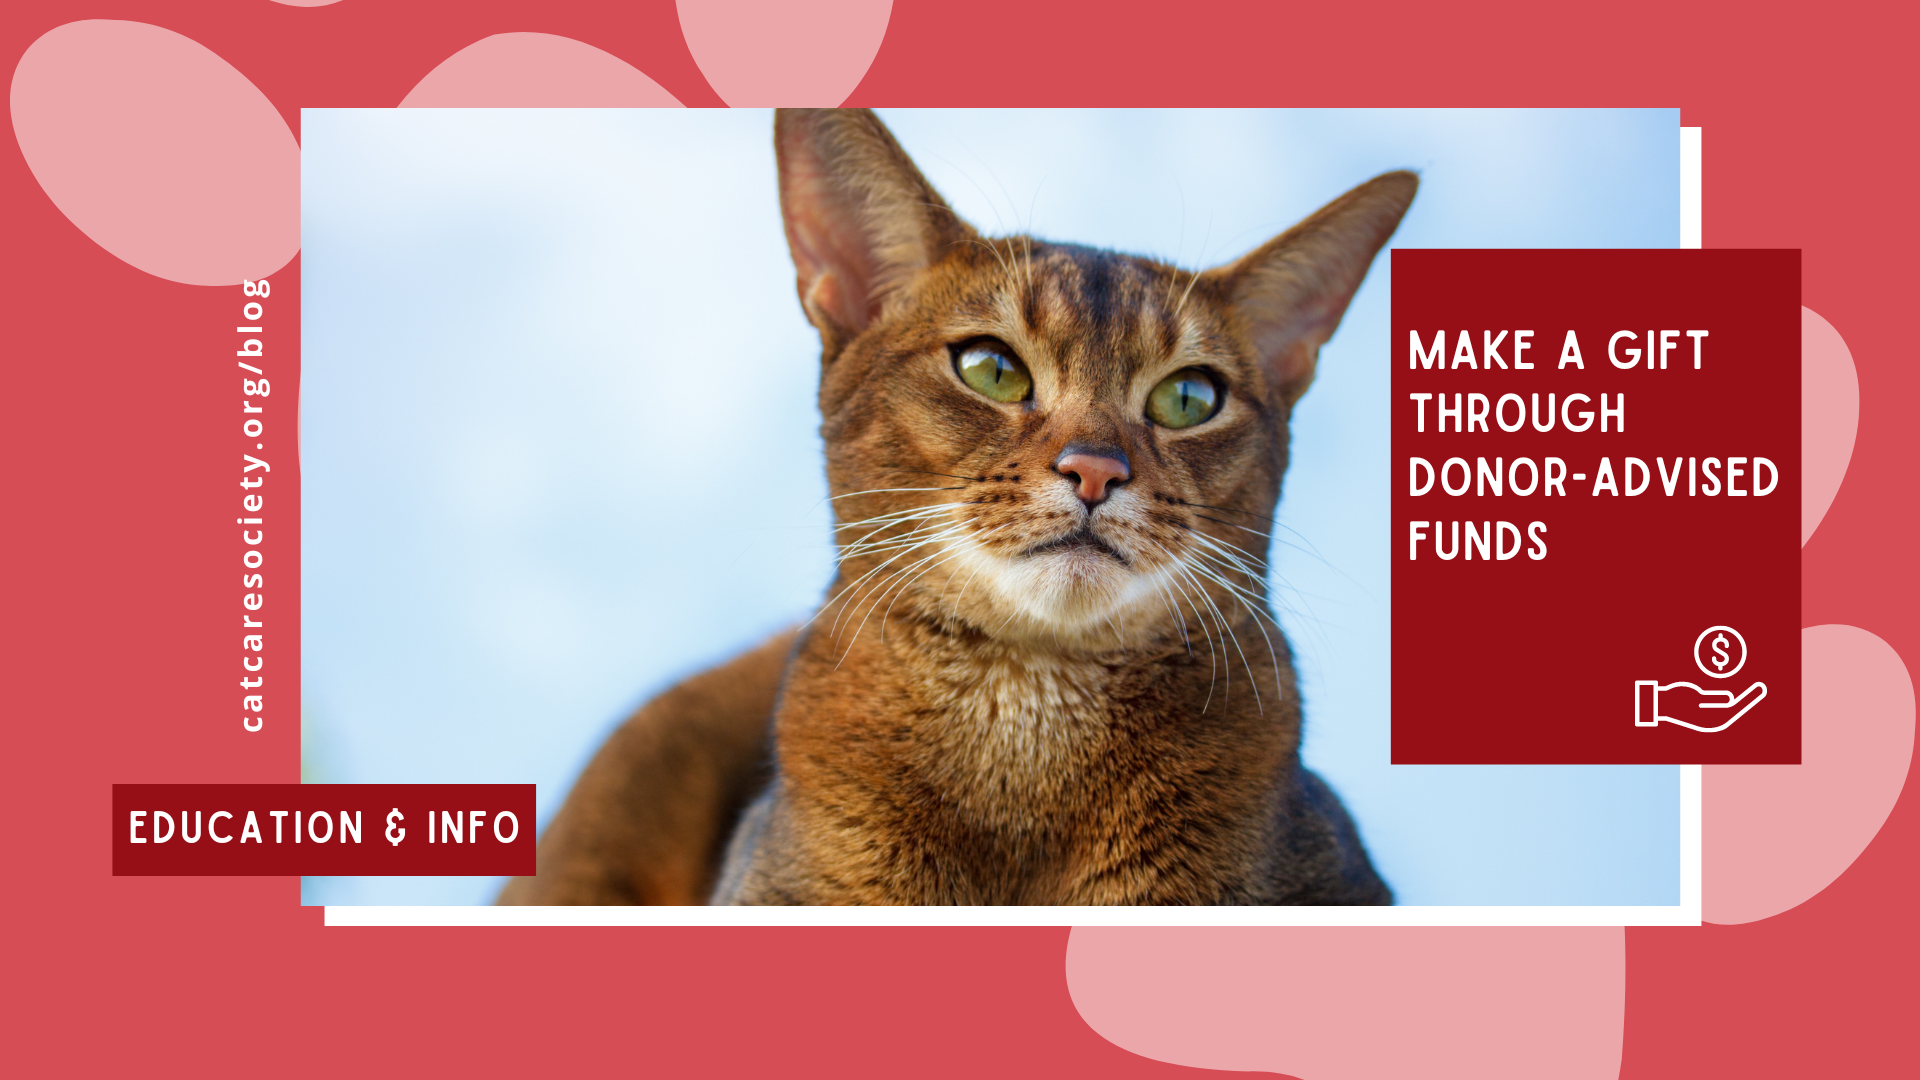 a cat is pictured on a red background with text that says "Make a gift through donor-advised funds"